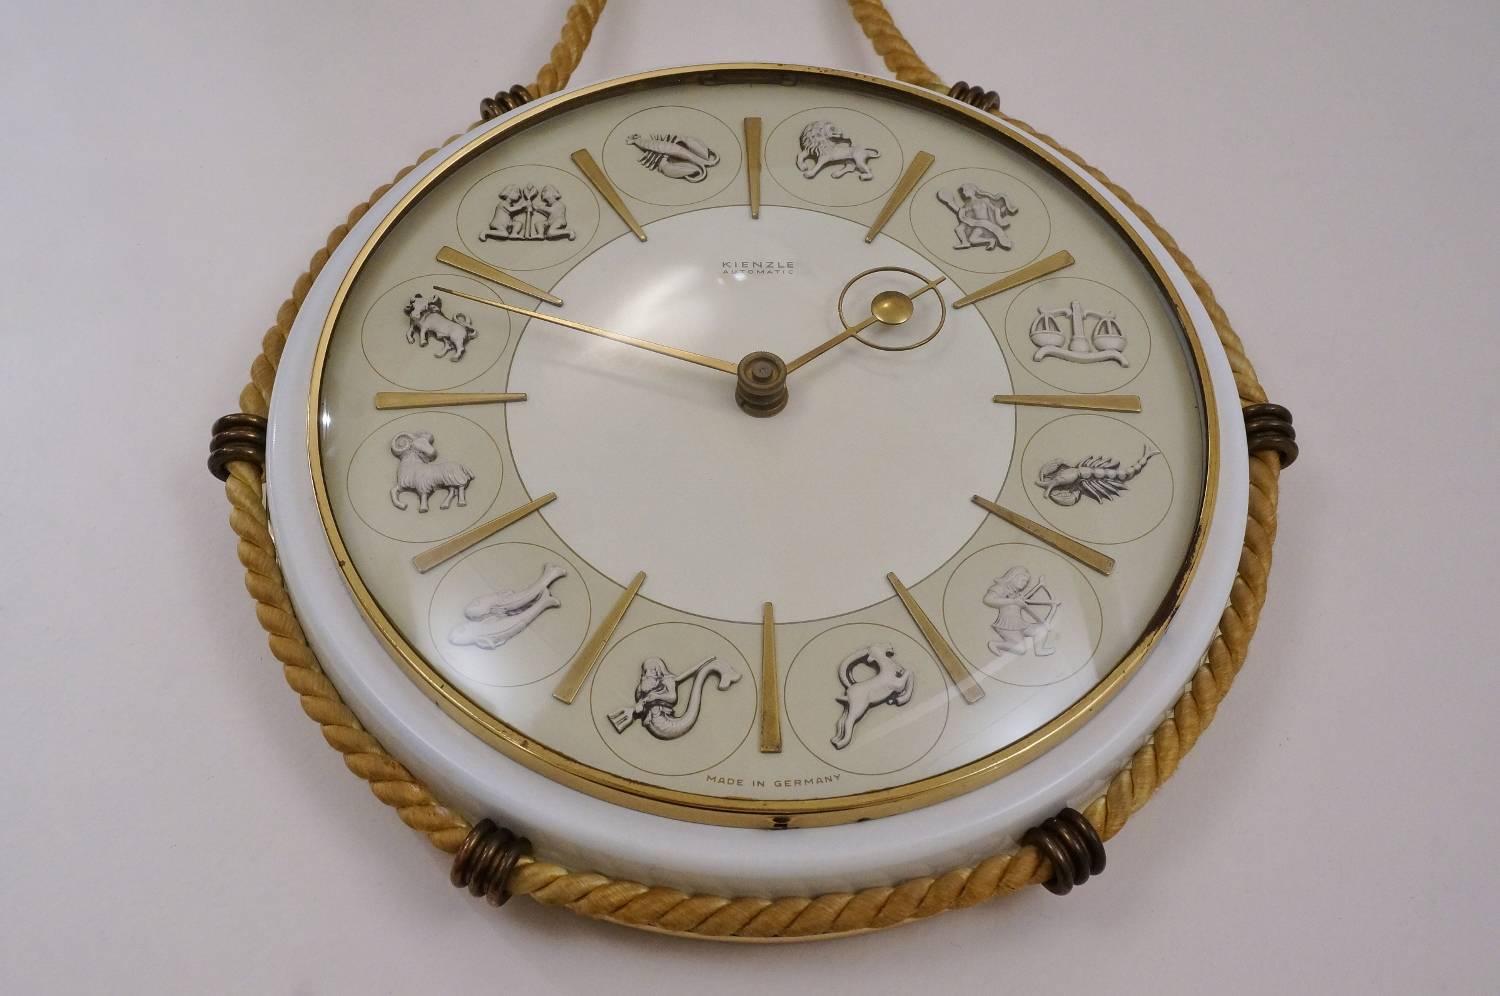 Kienzle clock Zodiac images, circa 1950s, German.

This clock has been gently cleaned while respecting the vintage patina. The clock mechanism is original and working. One D-sized battery is included.

Henry Johannes Möller 1950s design is a